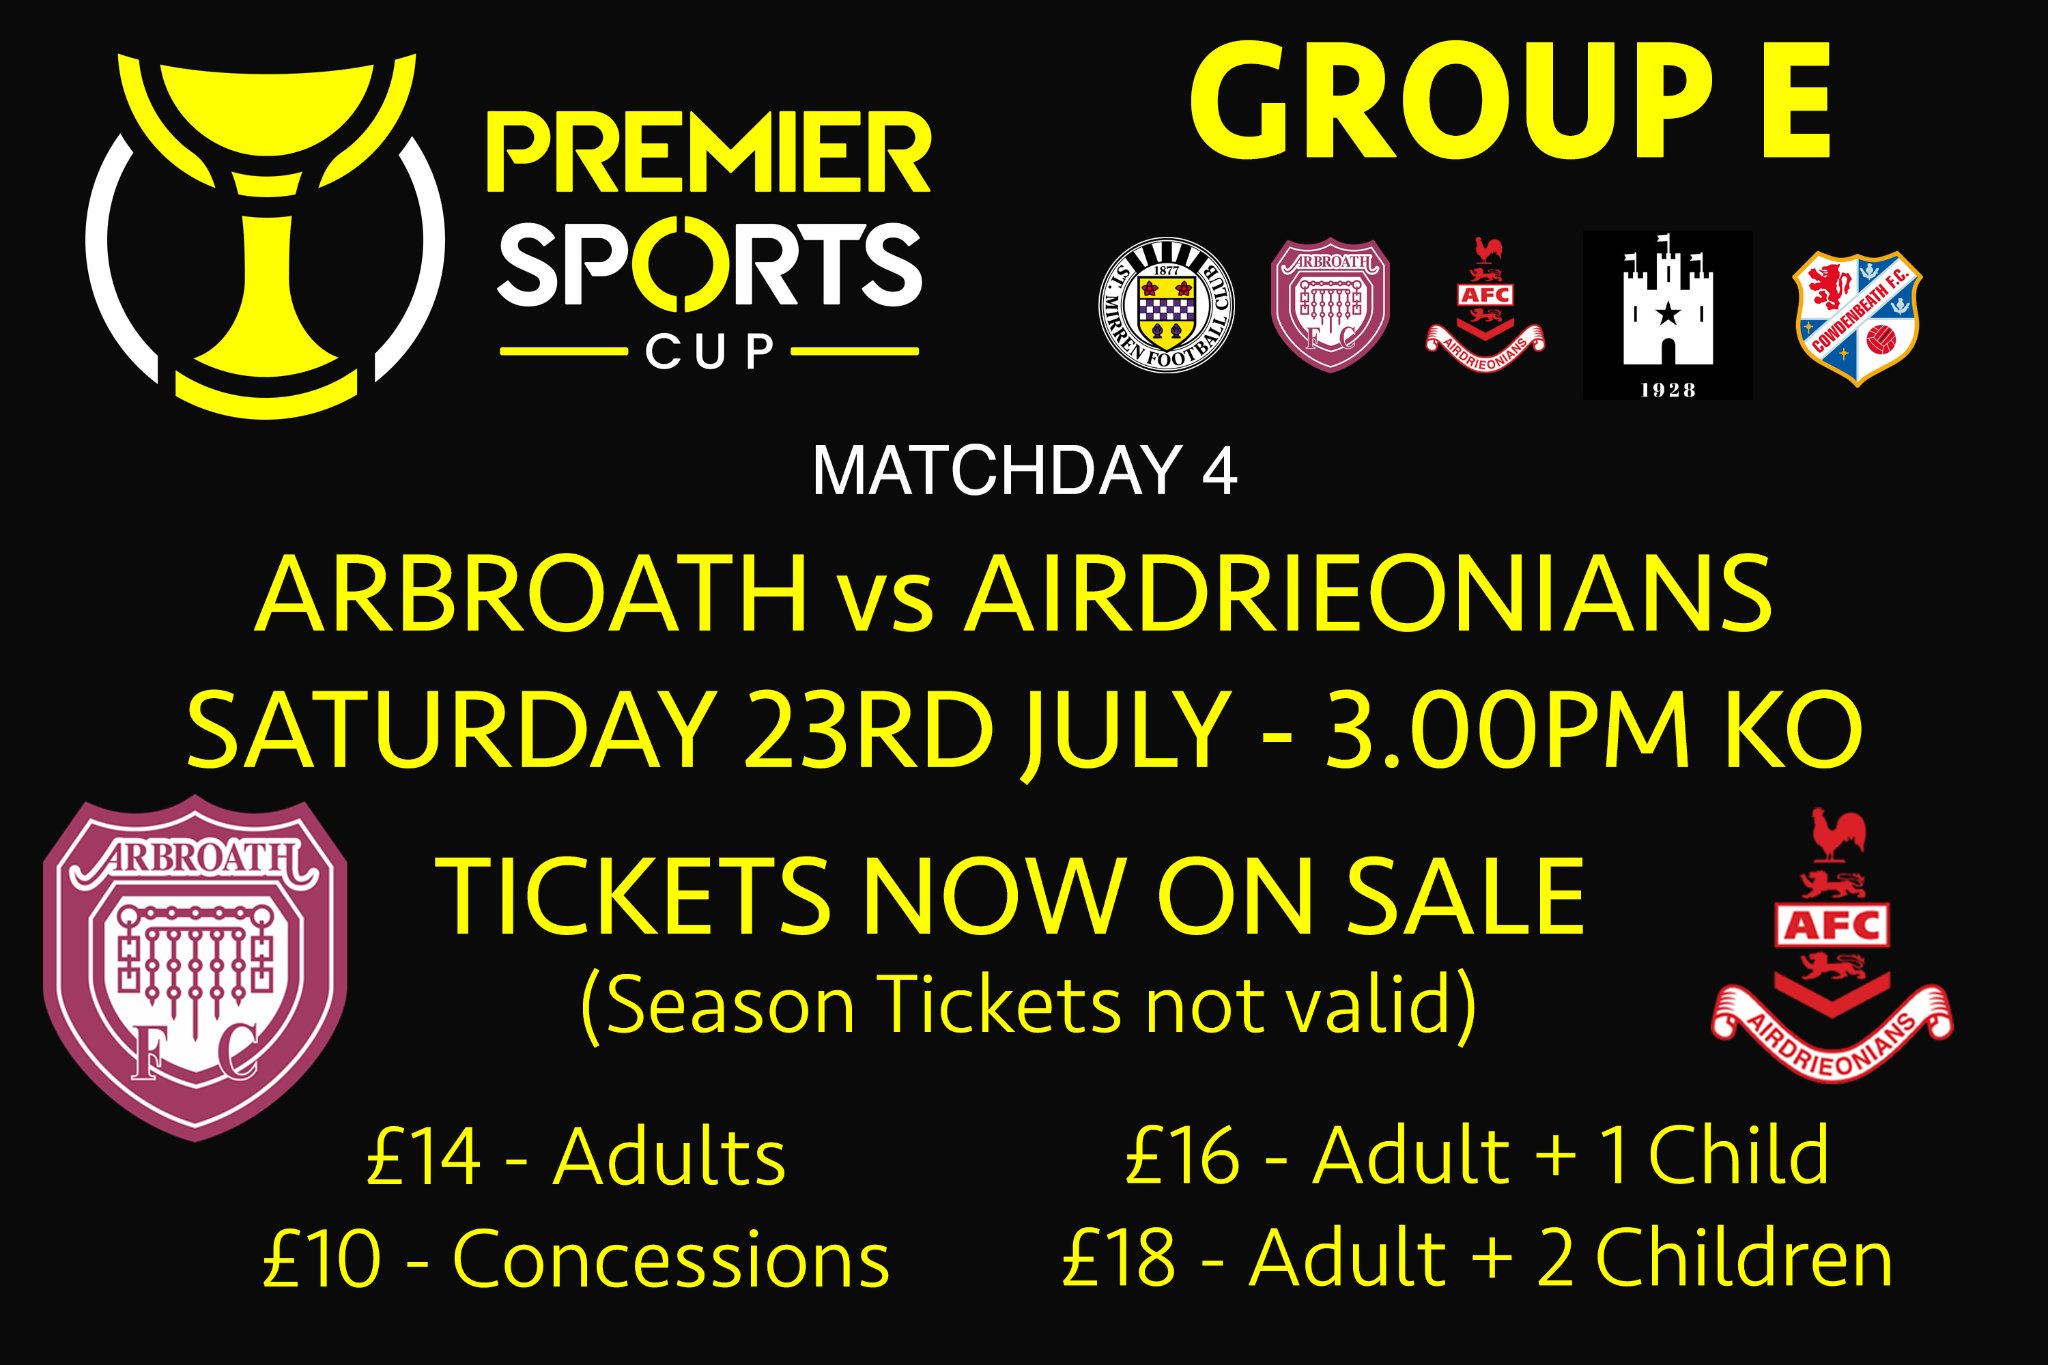 Arbroath vs Airdrieonians - Tickets now on sale